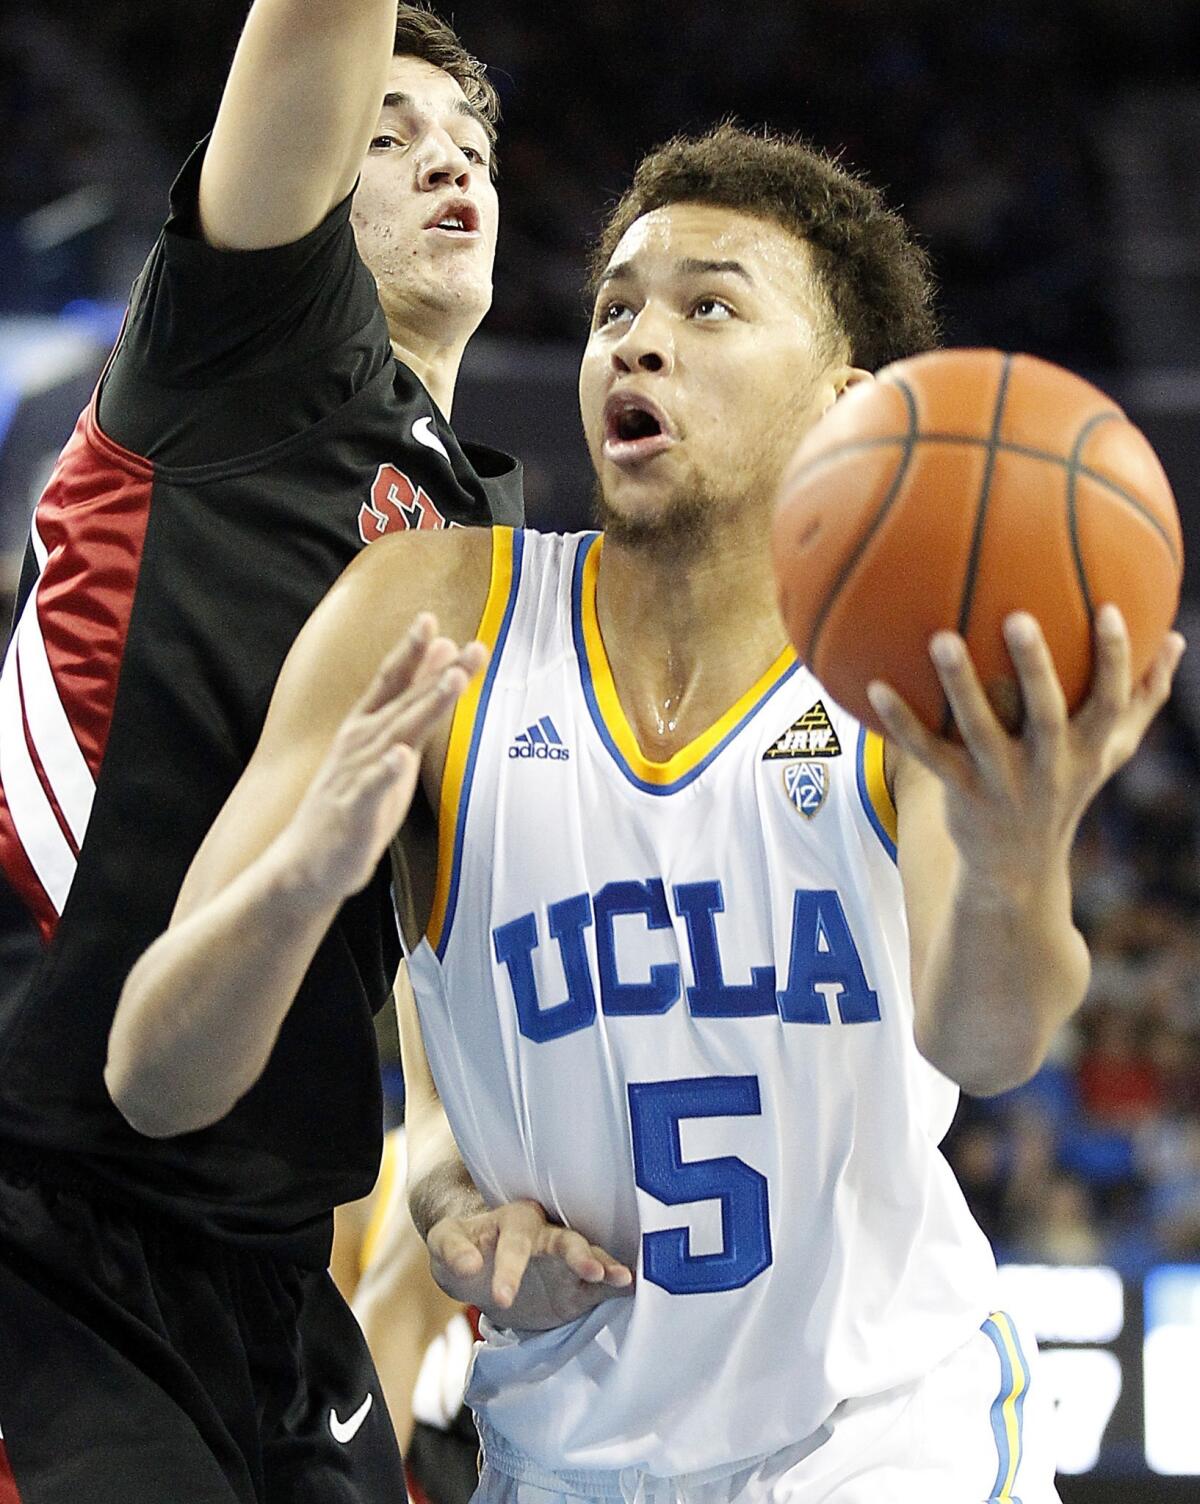 UCLA's Kyle Anderson, seen here in a game against Stanford last season, finished with 22 points and 12 rebounds in a 109-79 preseason win over Cal State San Marcos on Monday.